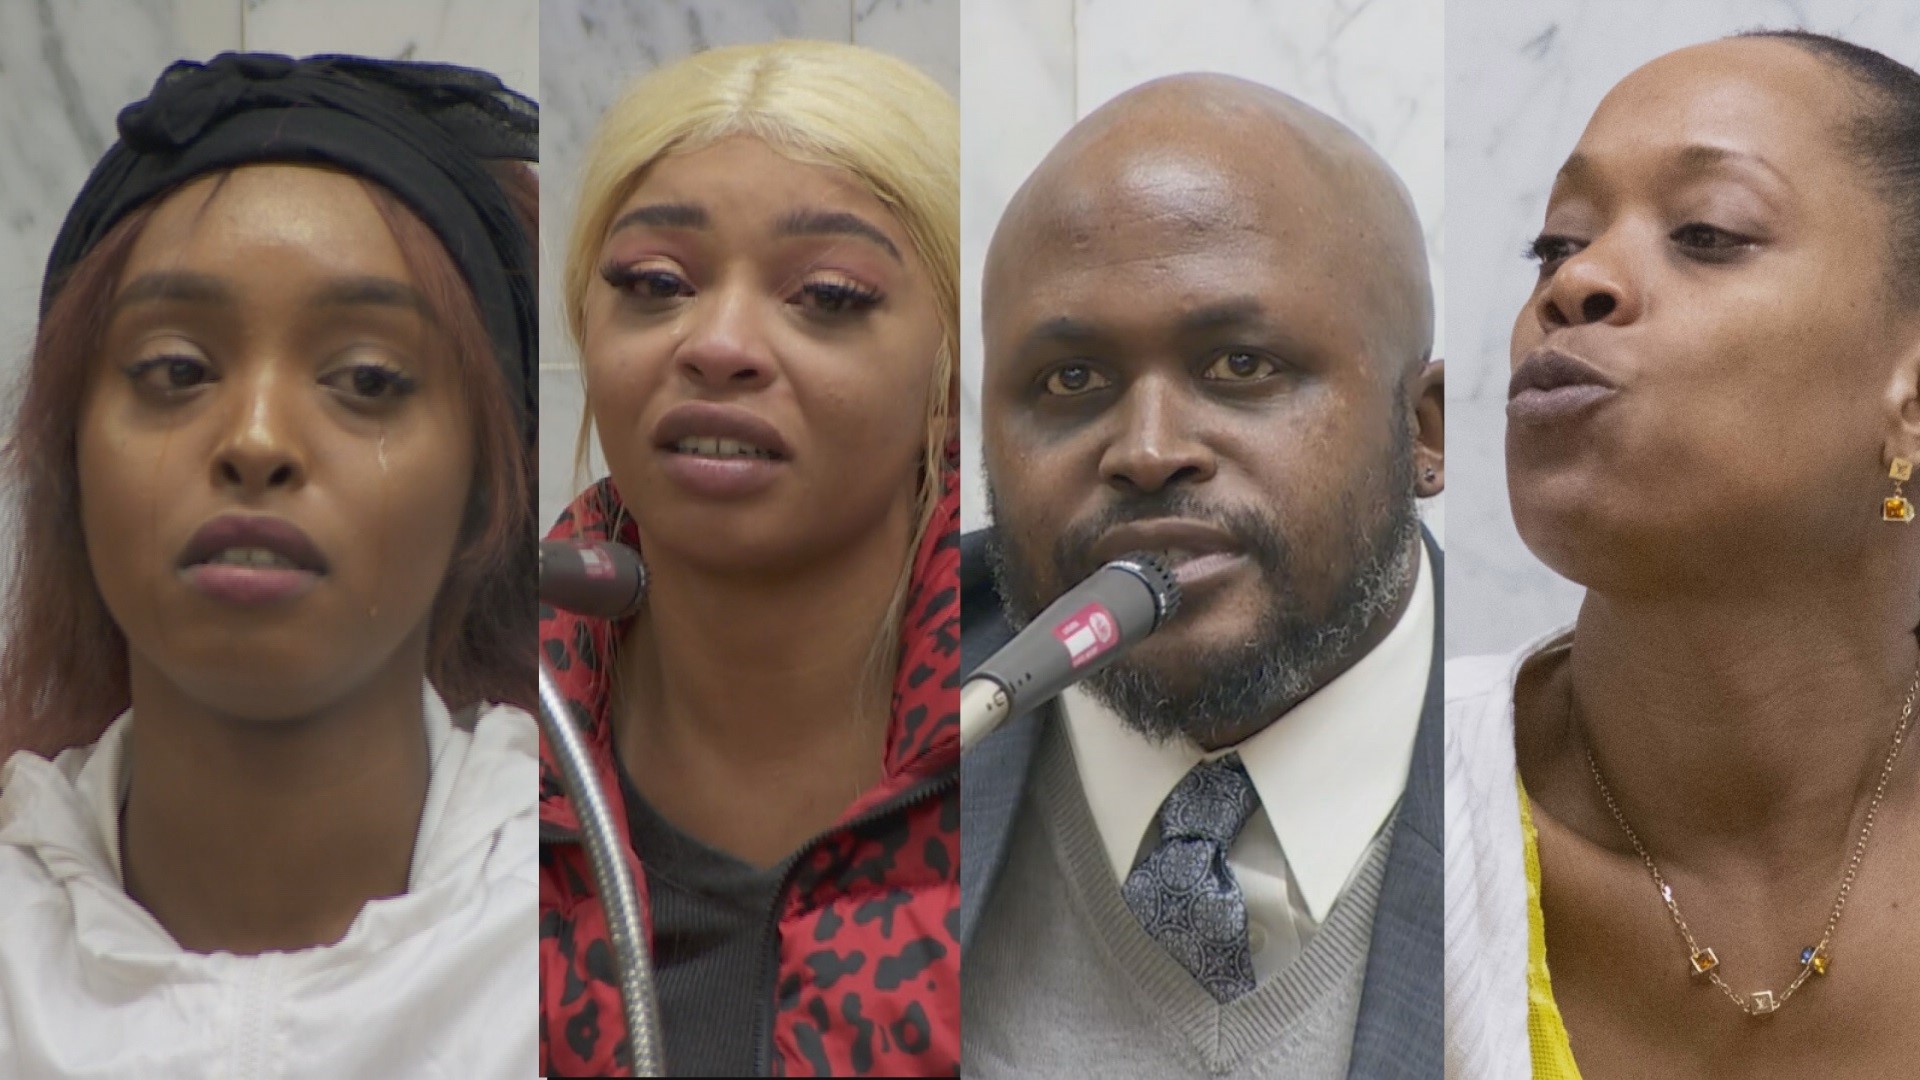 Communities of color are watching the Jeremy Christian trial closely. Maggie Vespa reports.